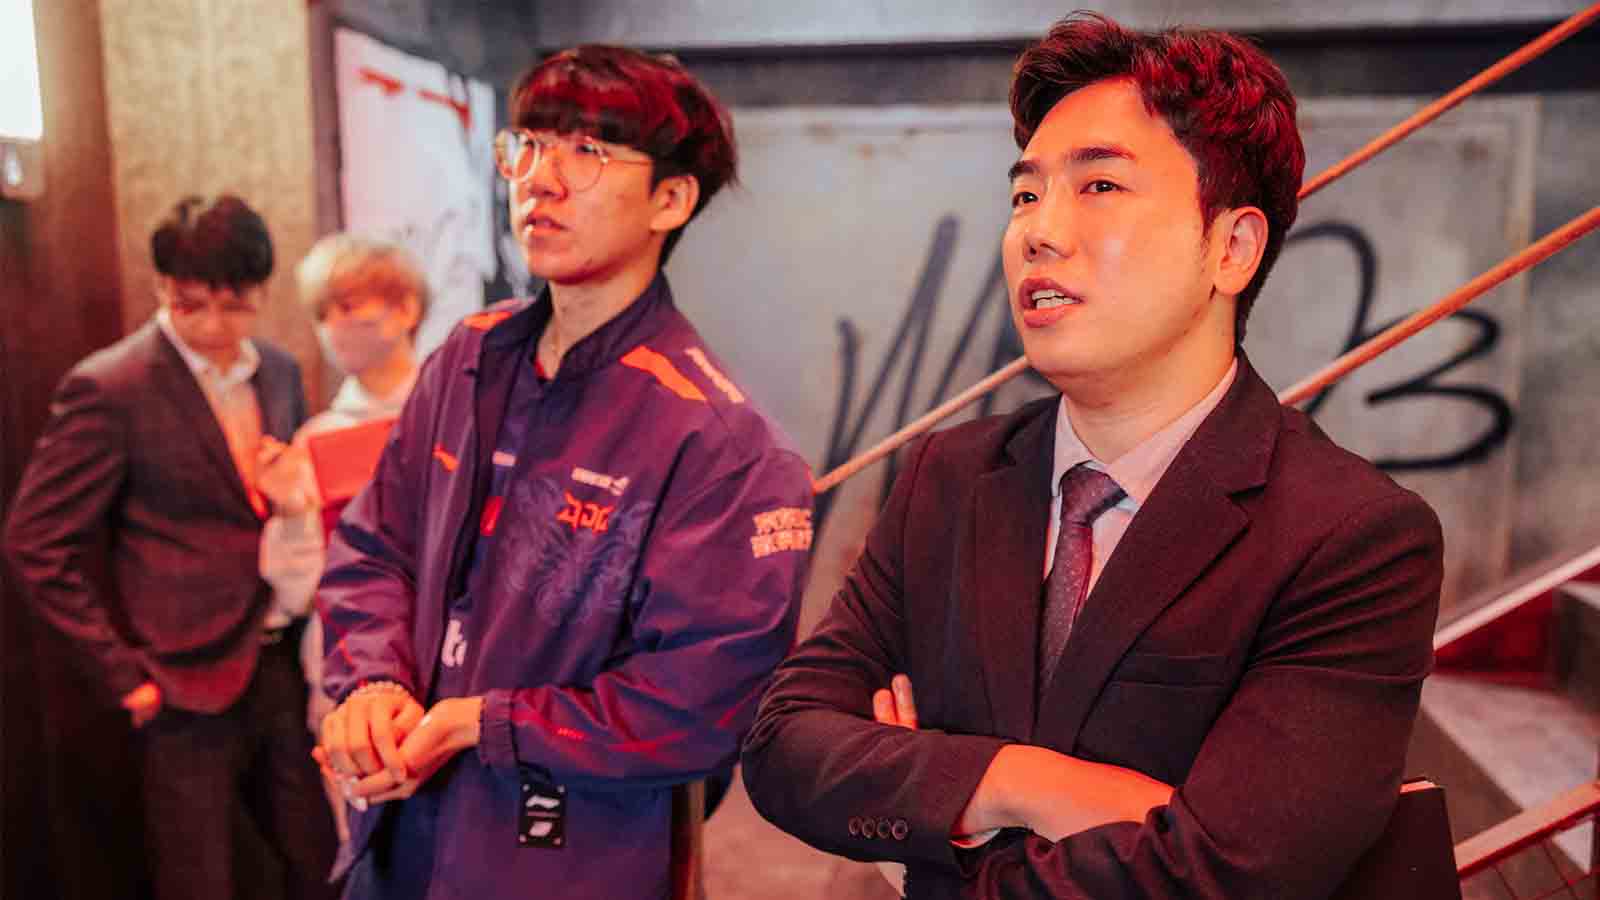 Exclusive: JDG coach Homme solved last year’s motivation issues, but now has a ‘bigger’ problem on his hands - ONE Esports